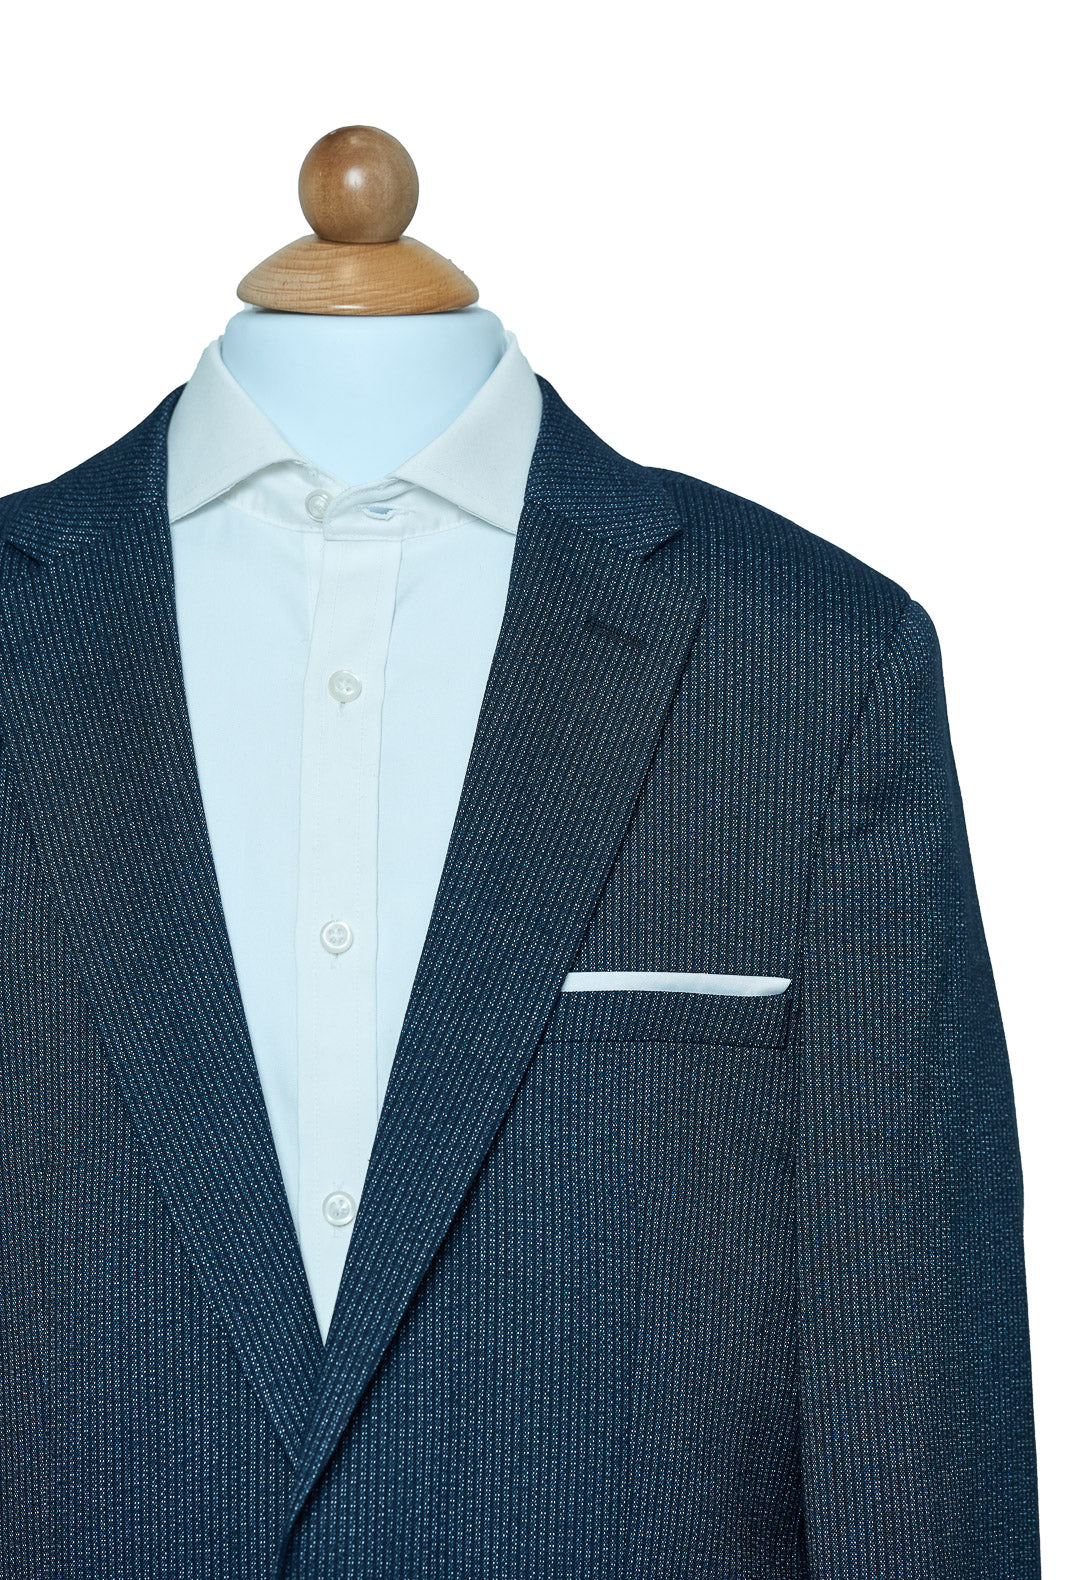 NEW Striped Patterned Navy Suit